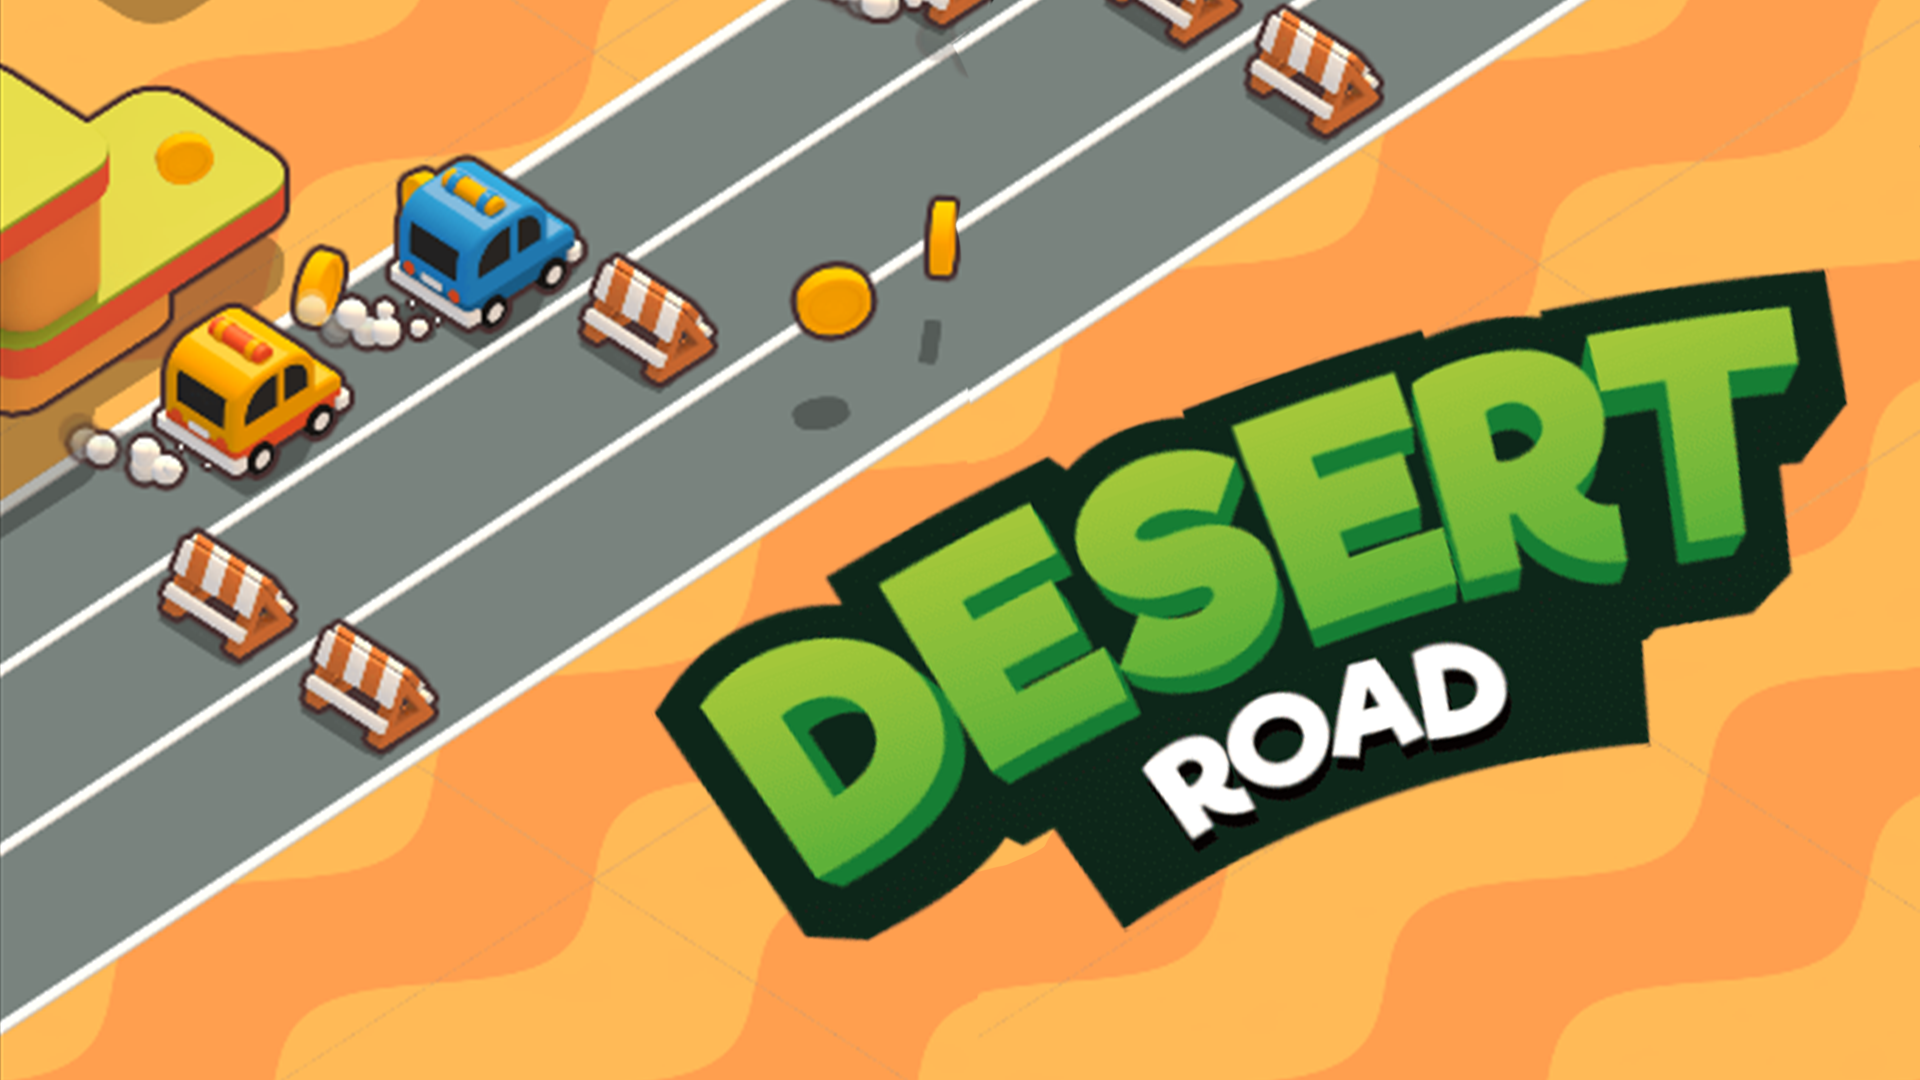 Tap to play Desert Road